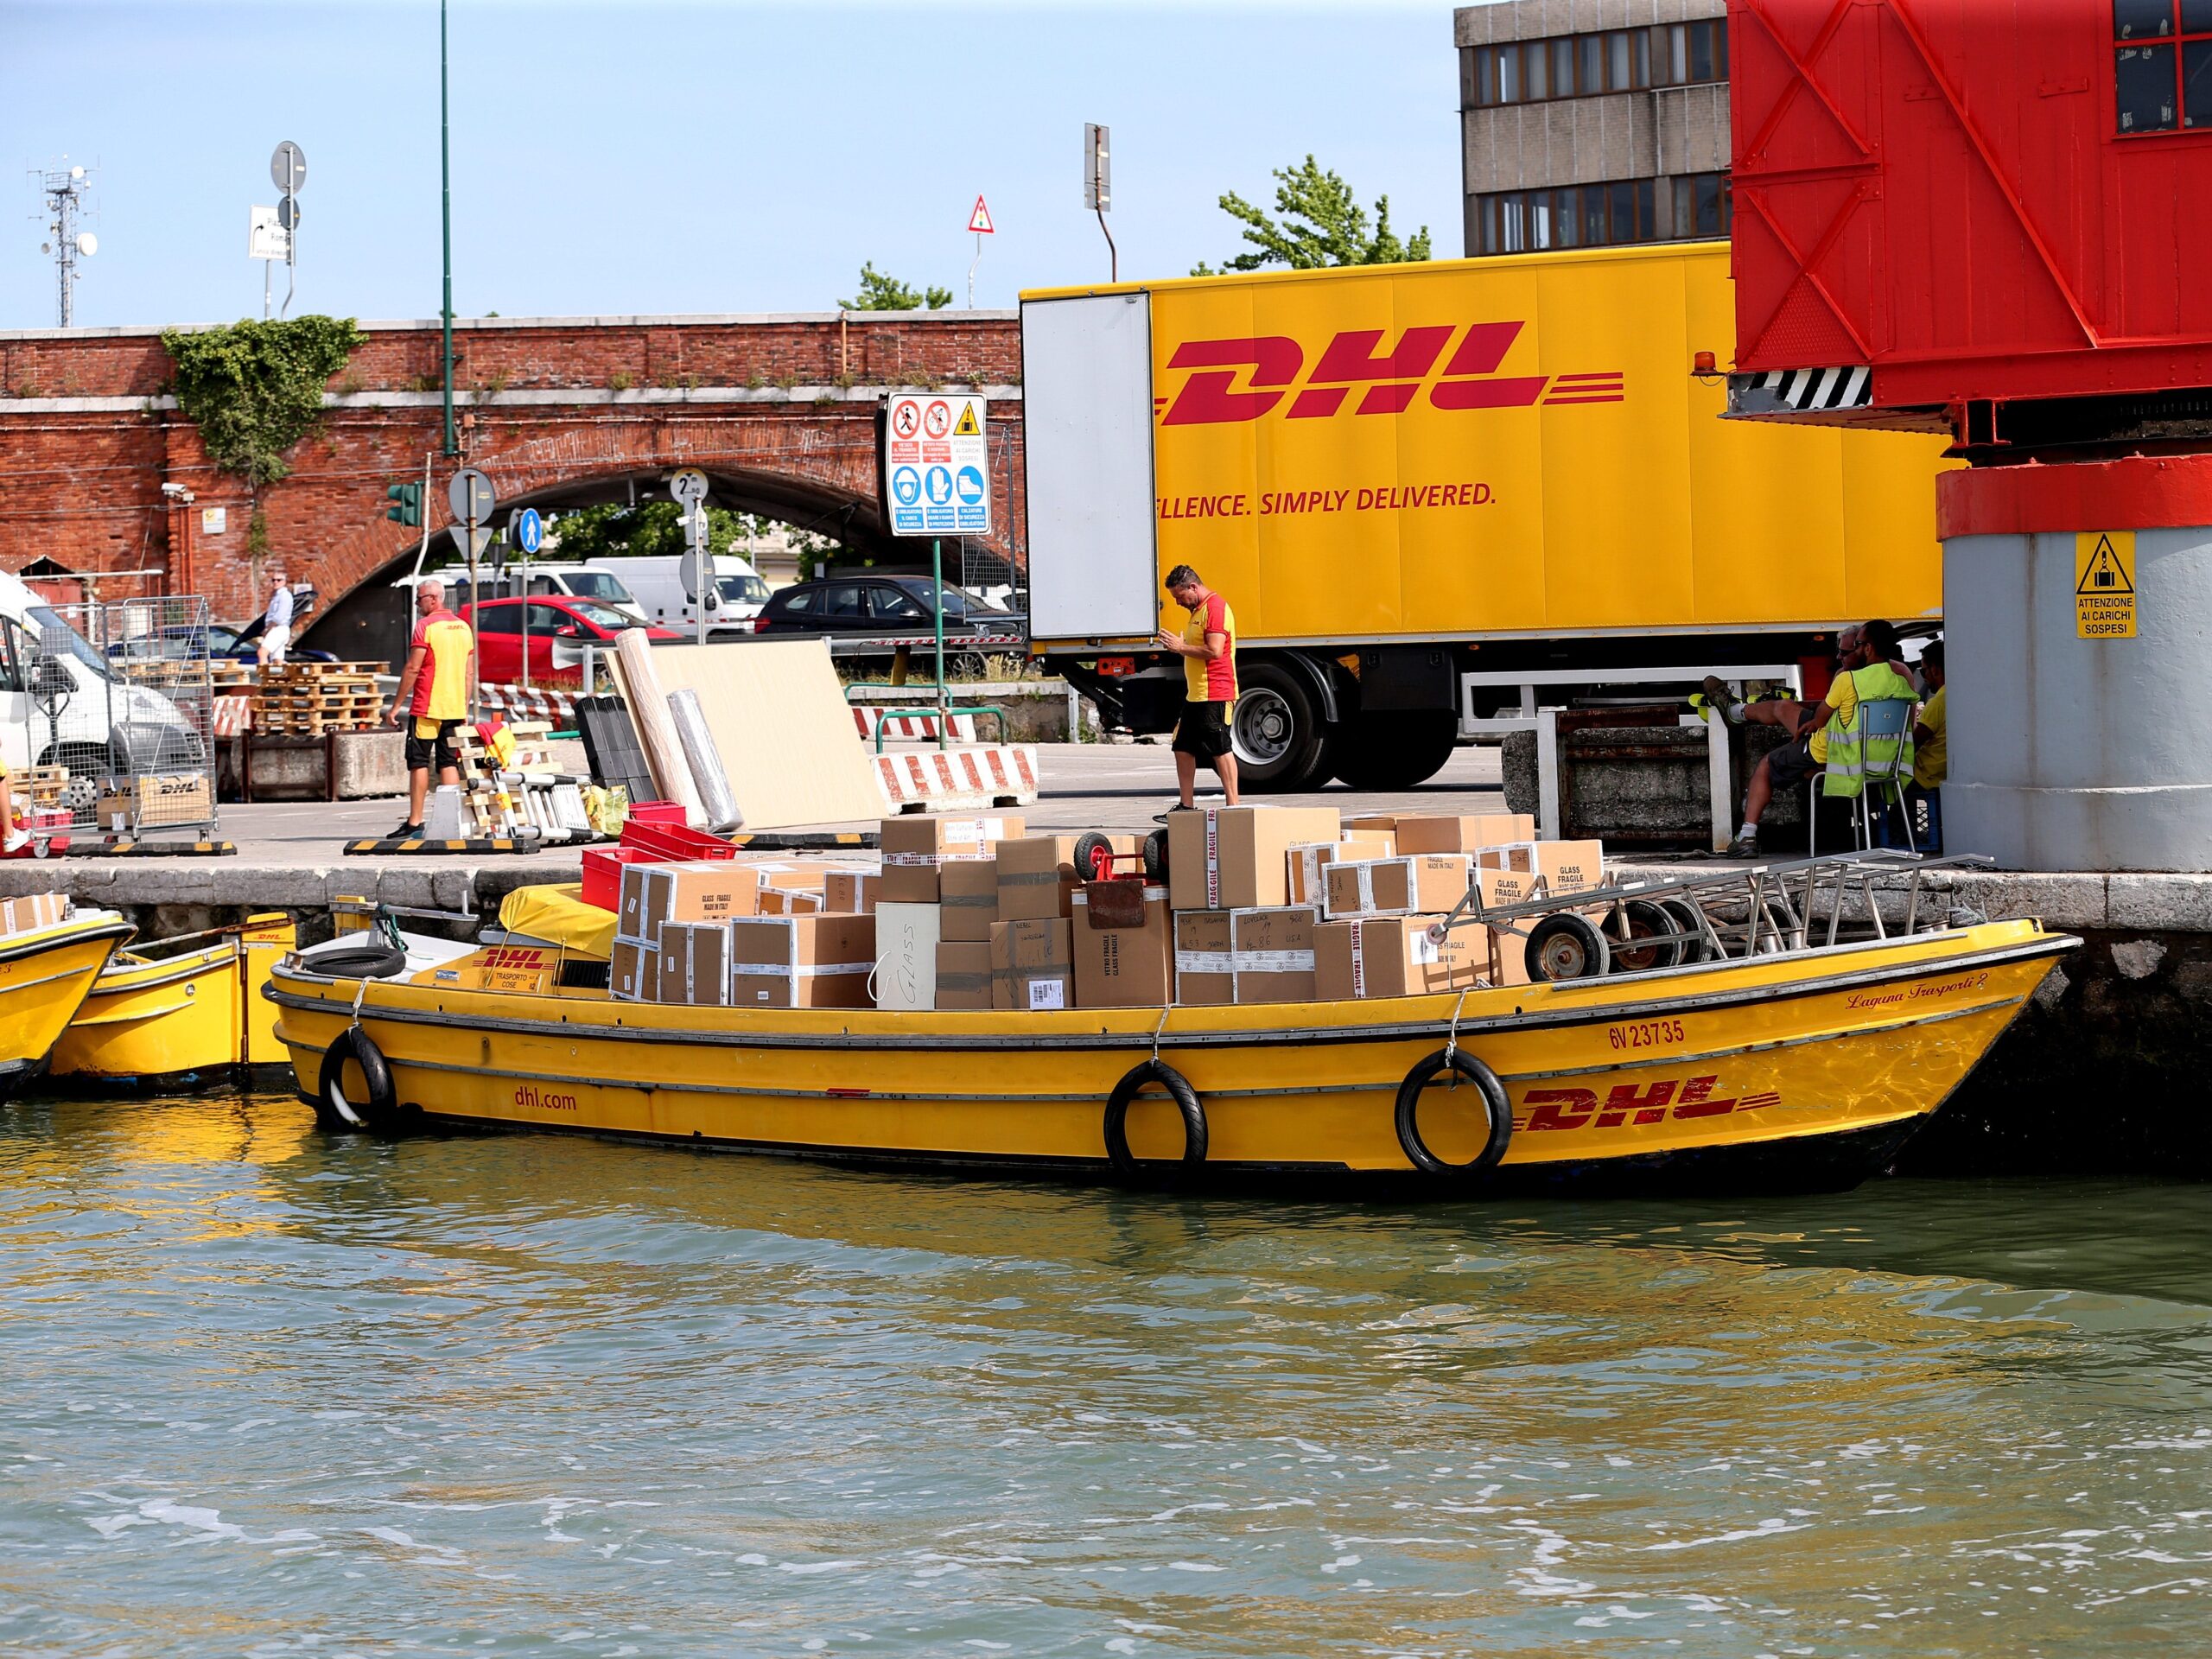 A yellow DHL boat full of packages is parked dockside in Venice, Italy.